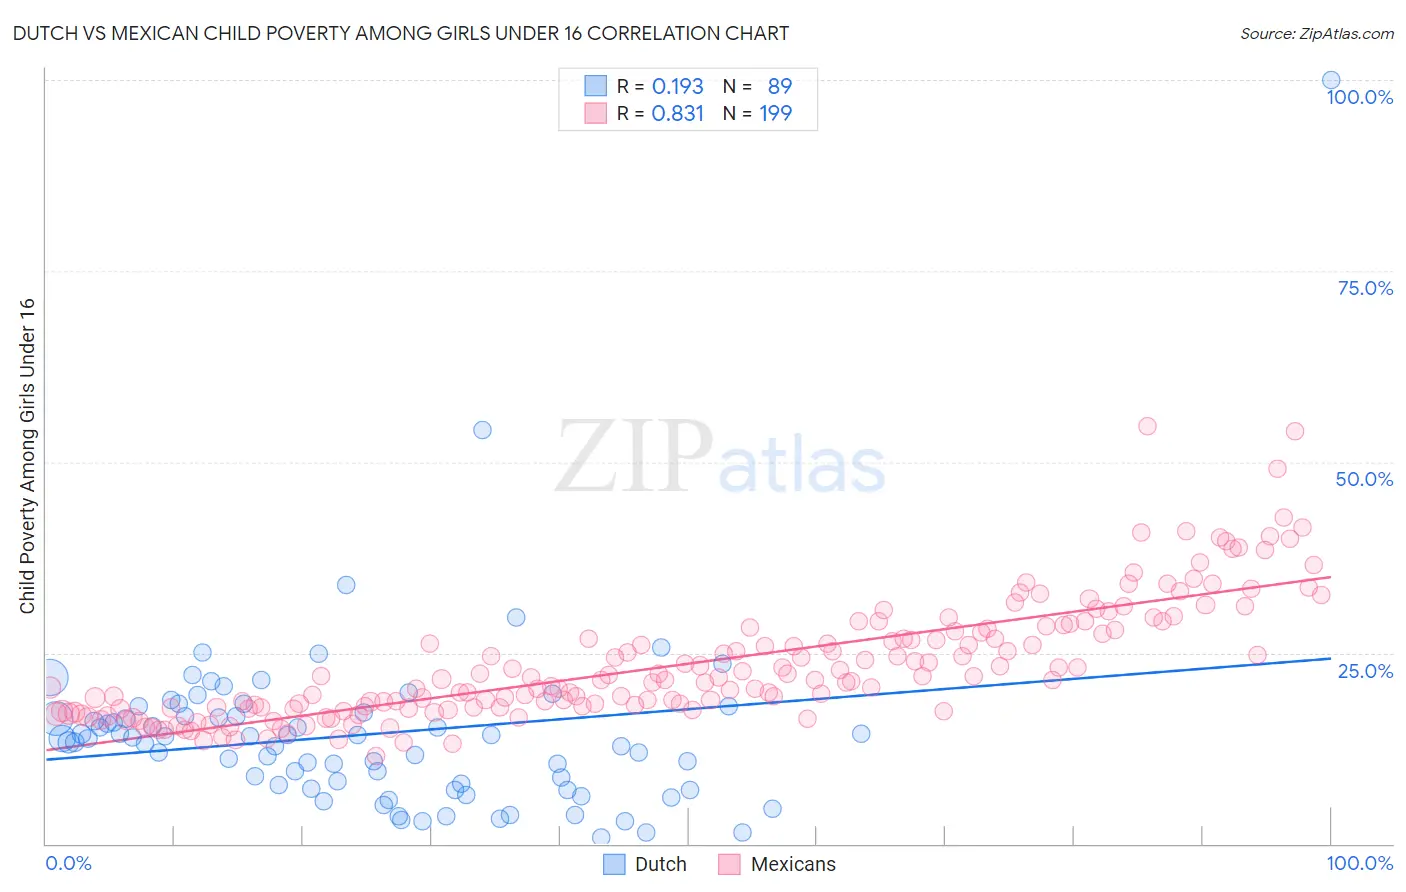 Dutch vs Mexican Child Poverty Among Girls Under 16